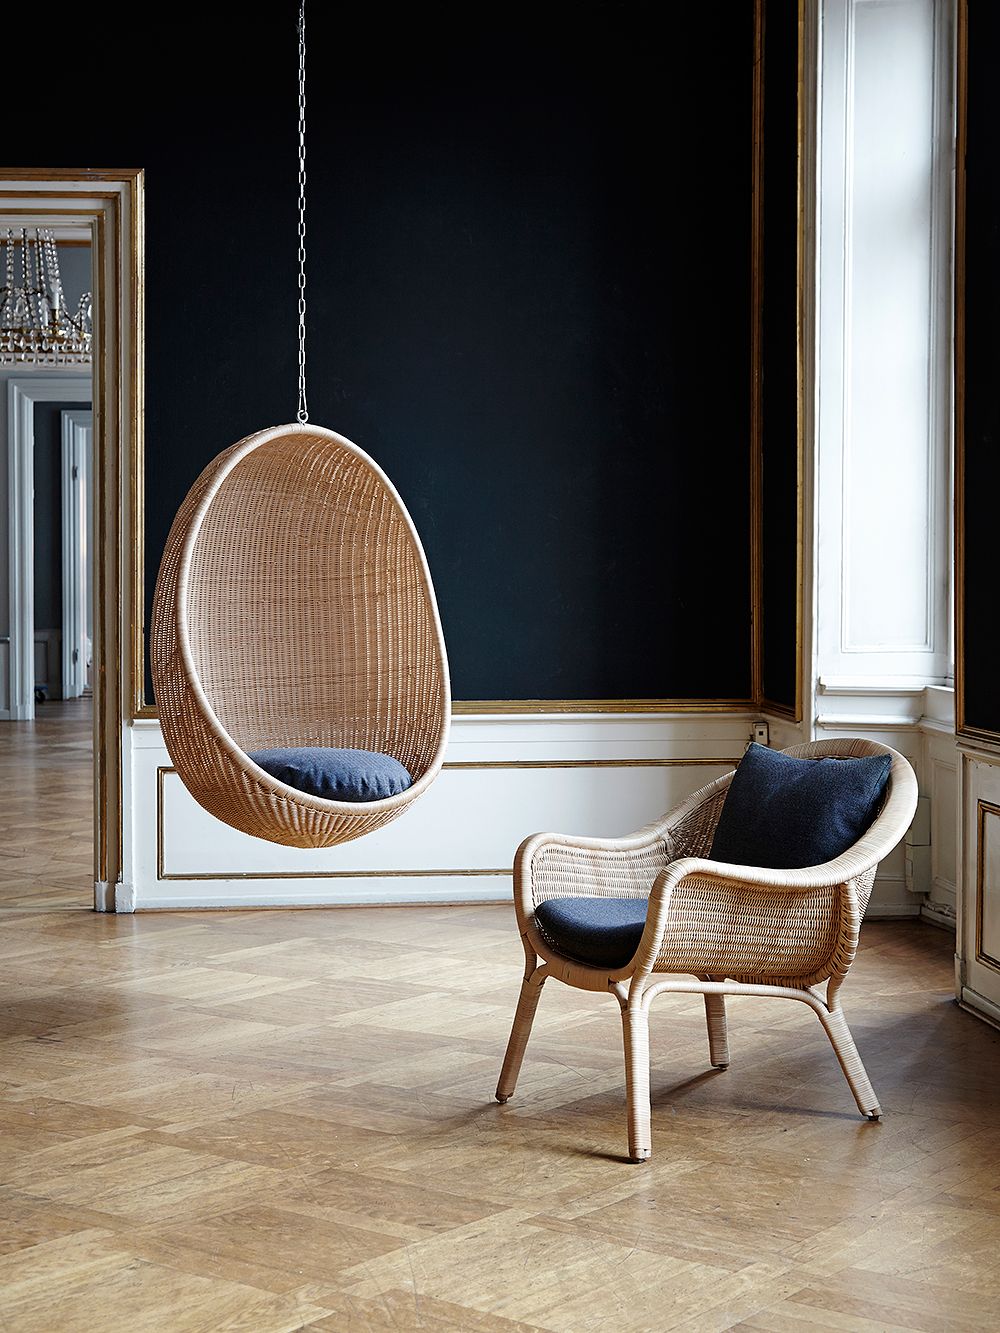 Sika-Design Hanging Egg chair